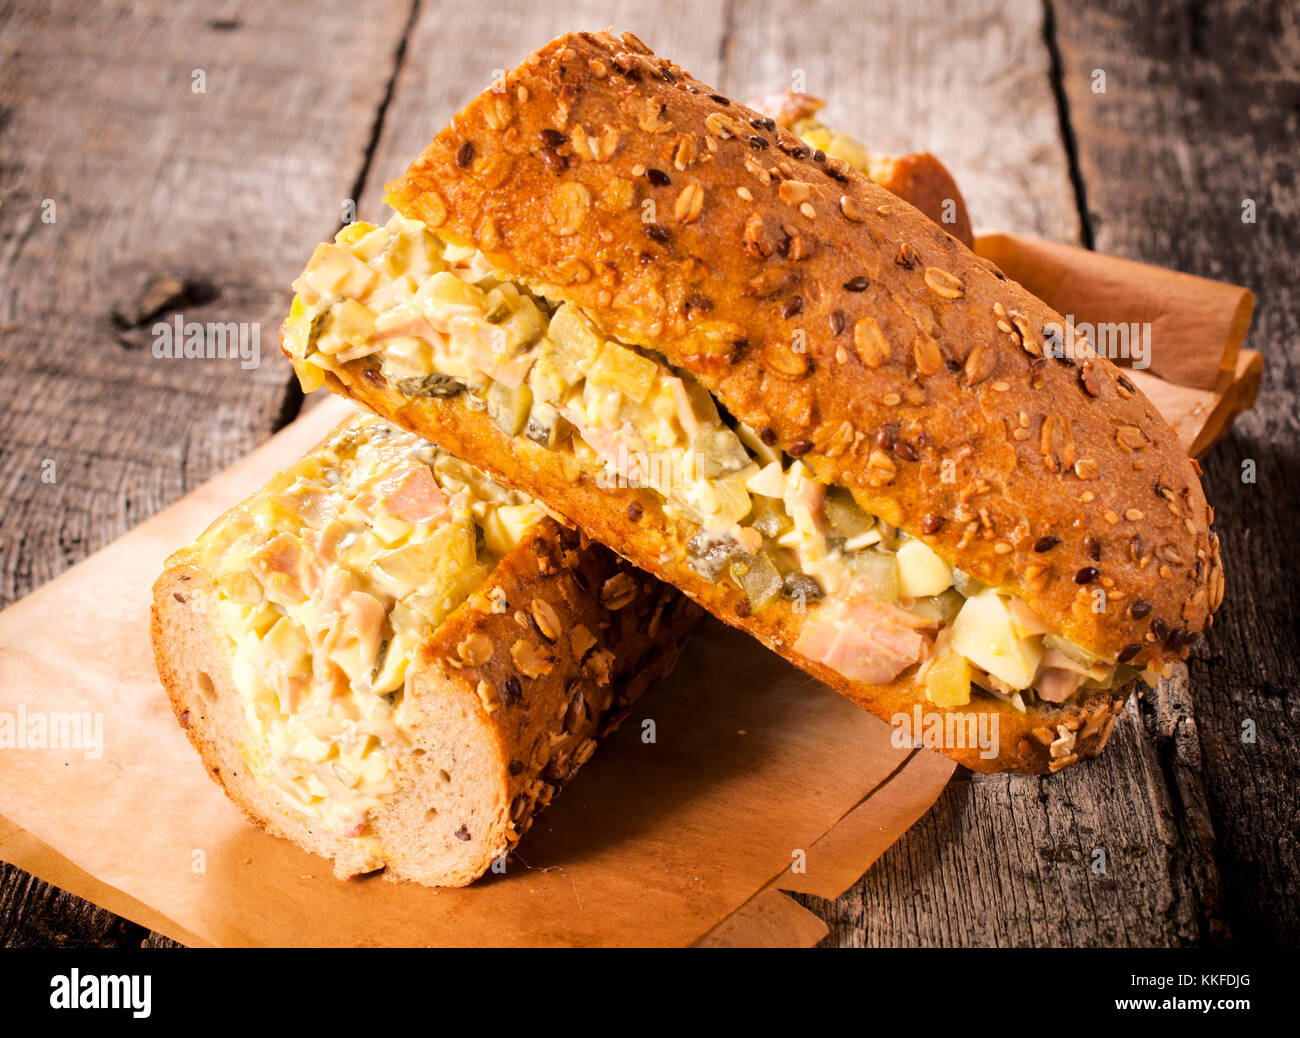 Gourment sandwiches with gourment salad Stock Photo